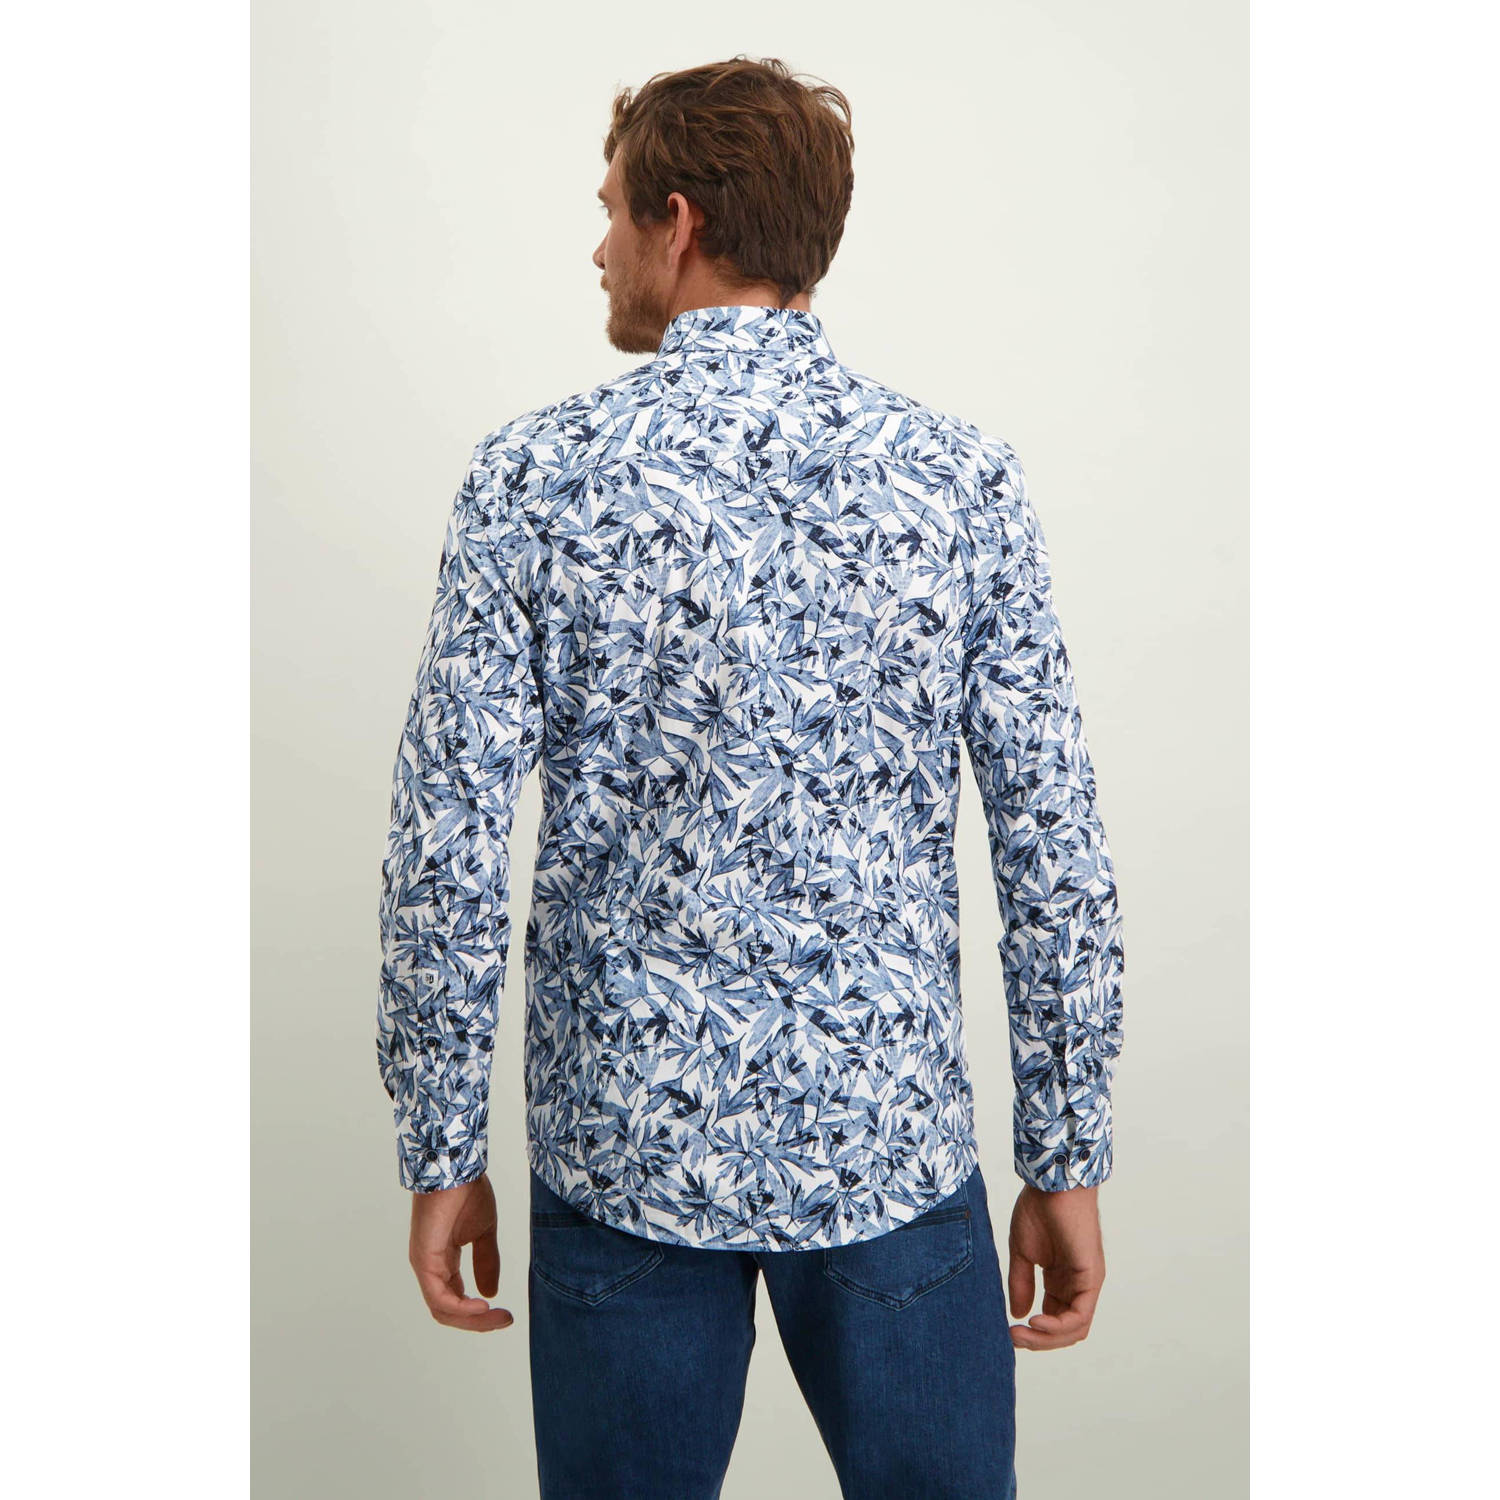 State of Art regular fit overhemd met all over print wit donkerblauw